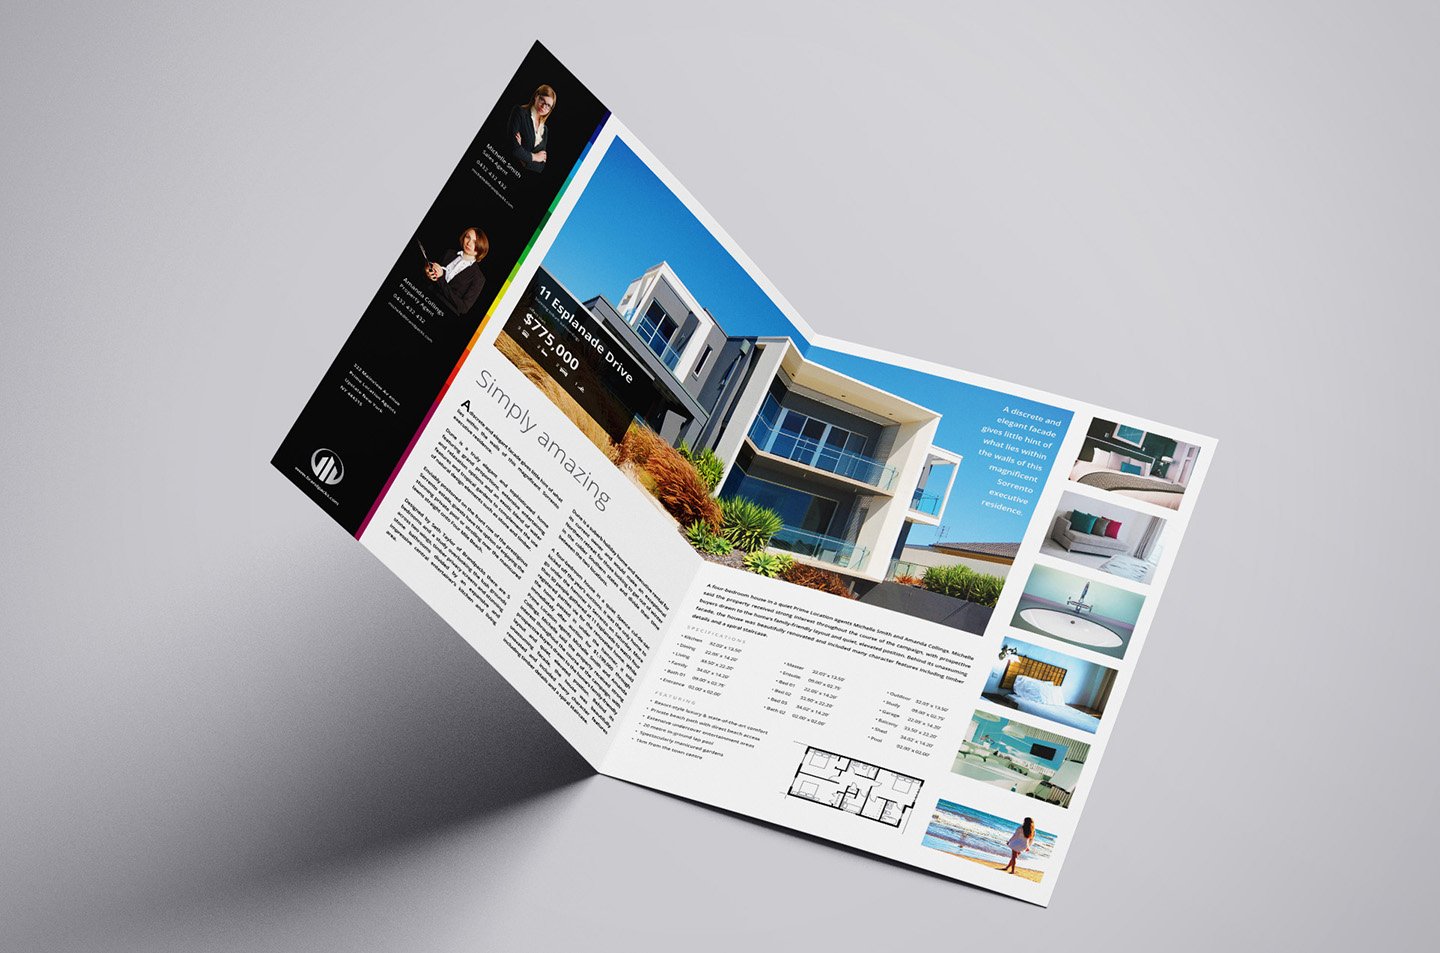 Real Estate Brochure Template cover image.